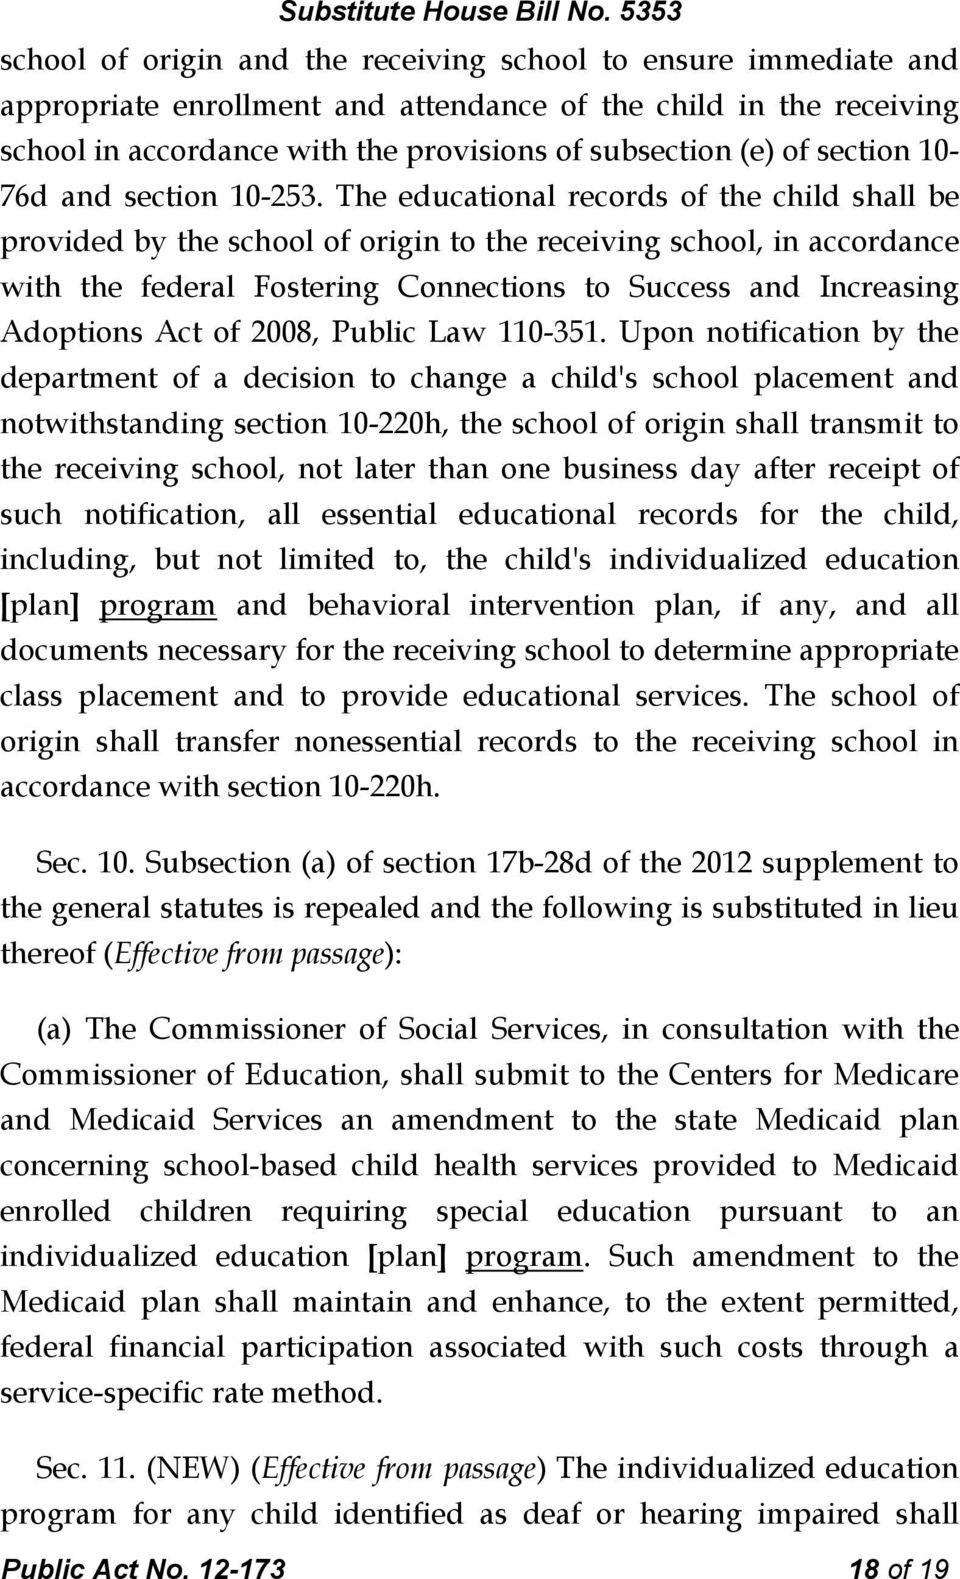 The educational records of the child shall be provided by the school of origin to the receiving school, in accordance with the federal Fostering Connections to Success and Increasing Adoptions Act of